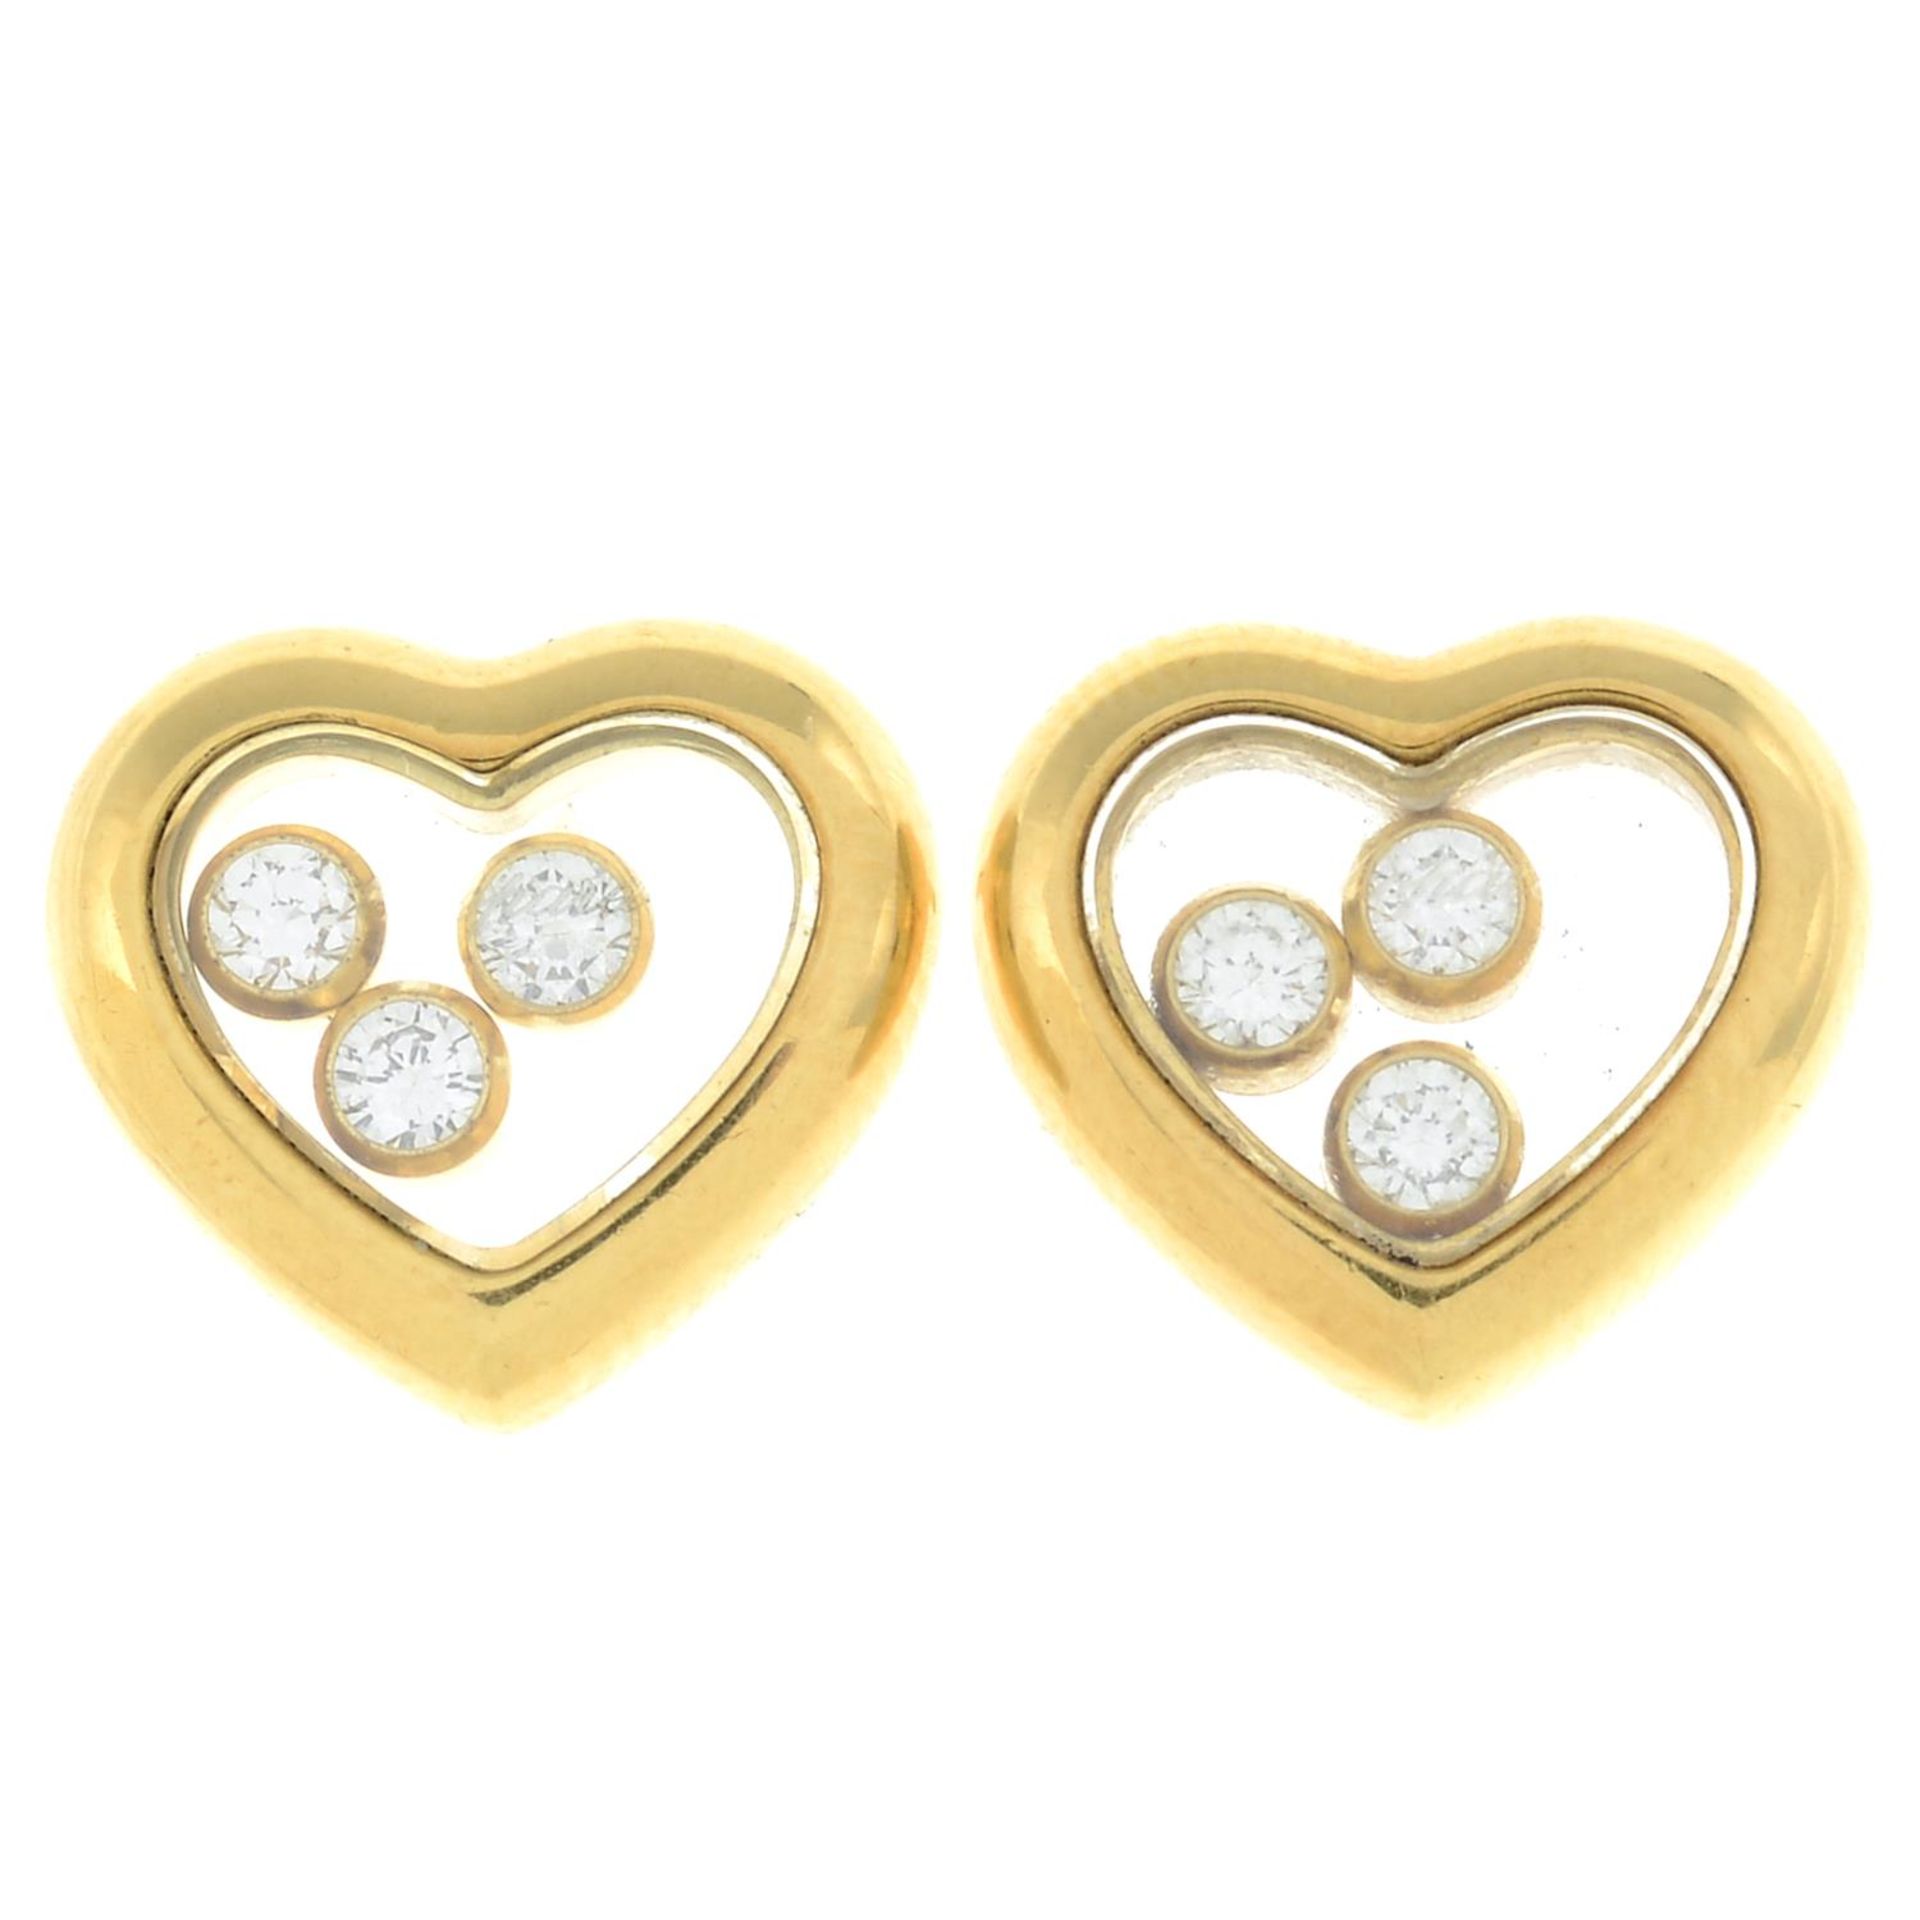 A pair of 18ct gold 'Happy Diamonds' earrings, - Image 2 of 6